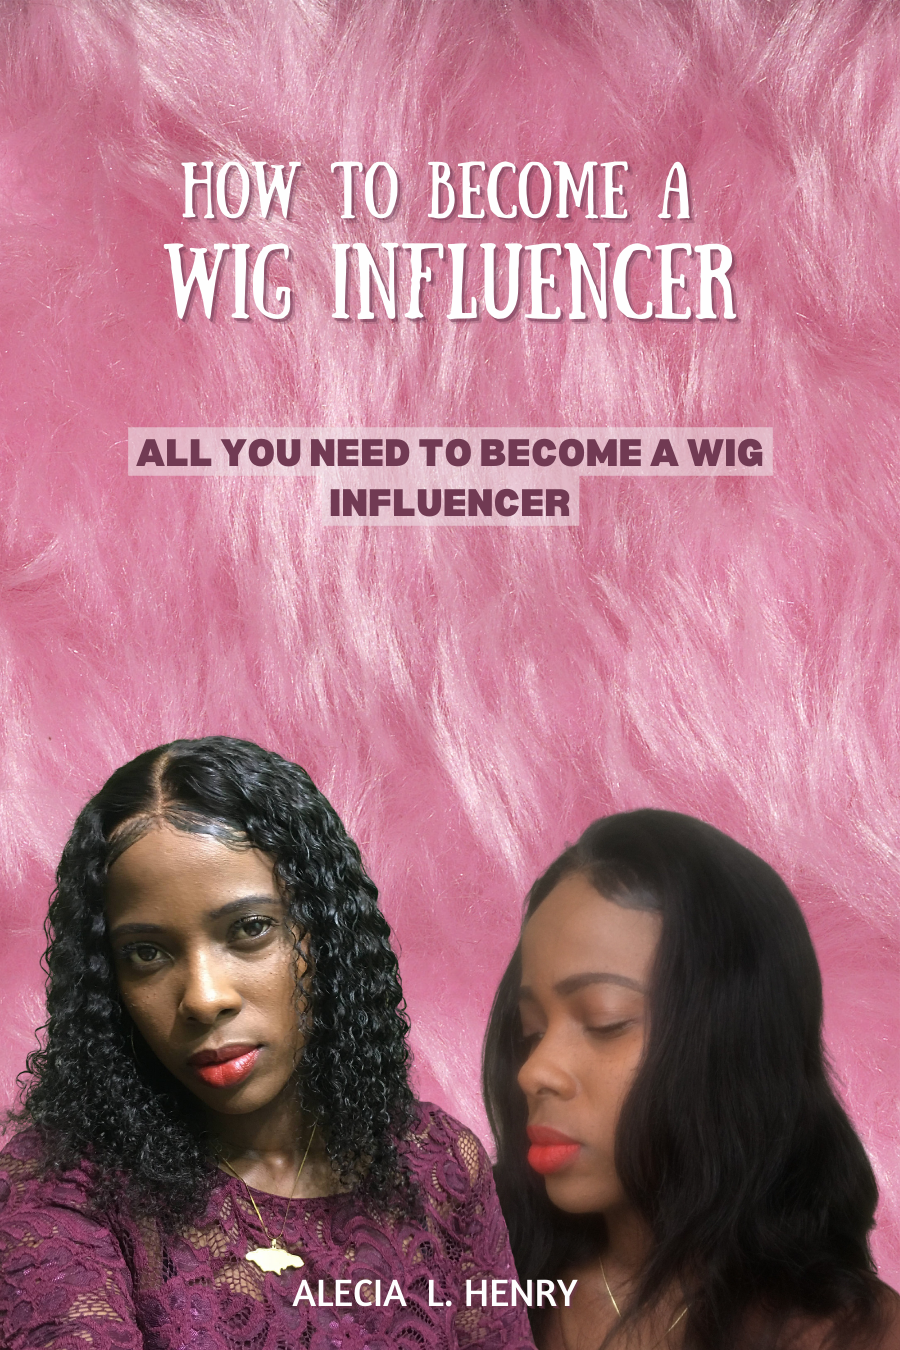 How to become a wig influencer: All you need to become a wig influencer